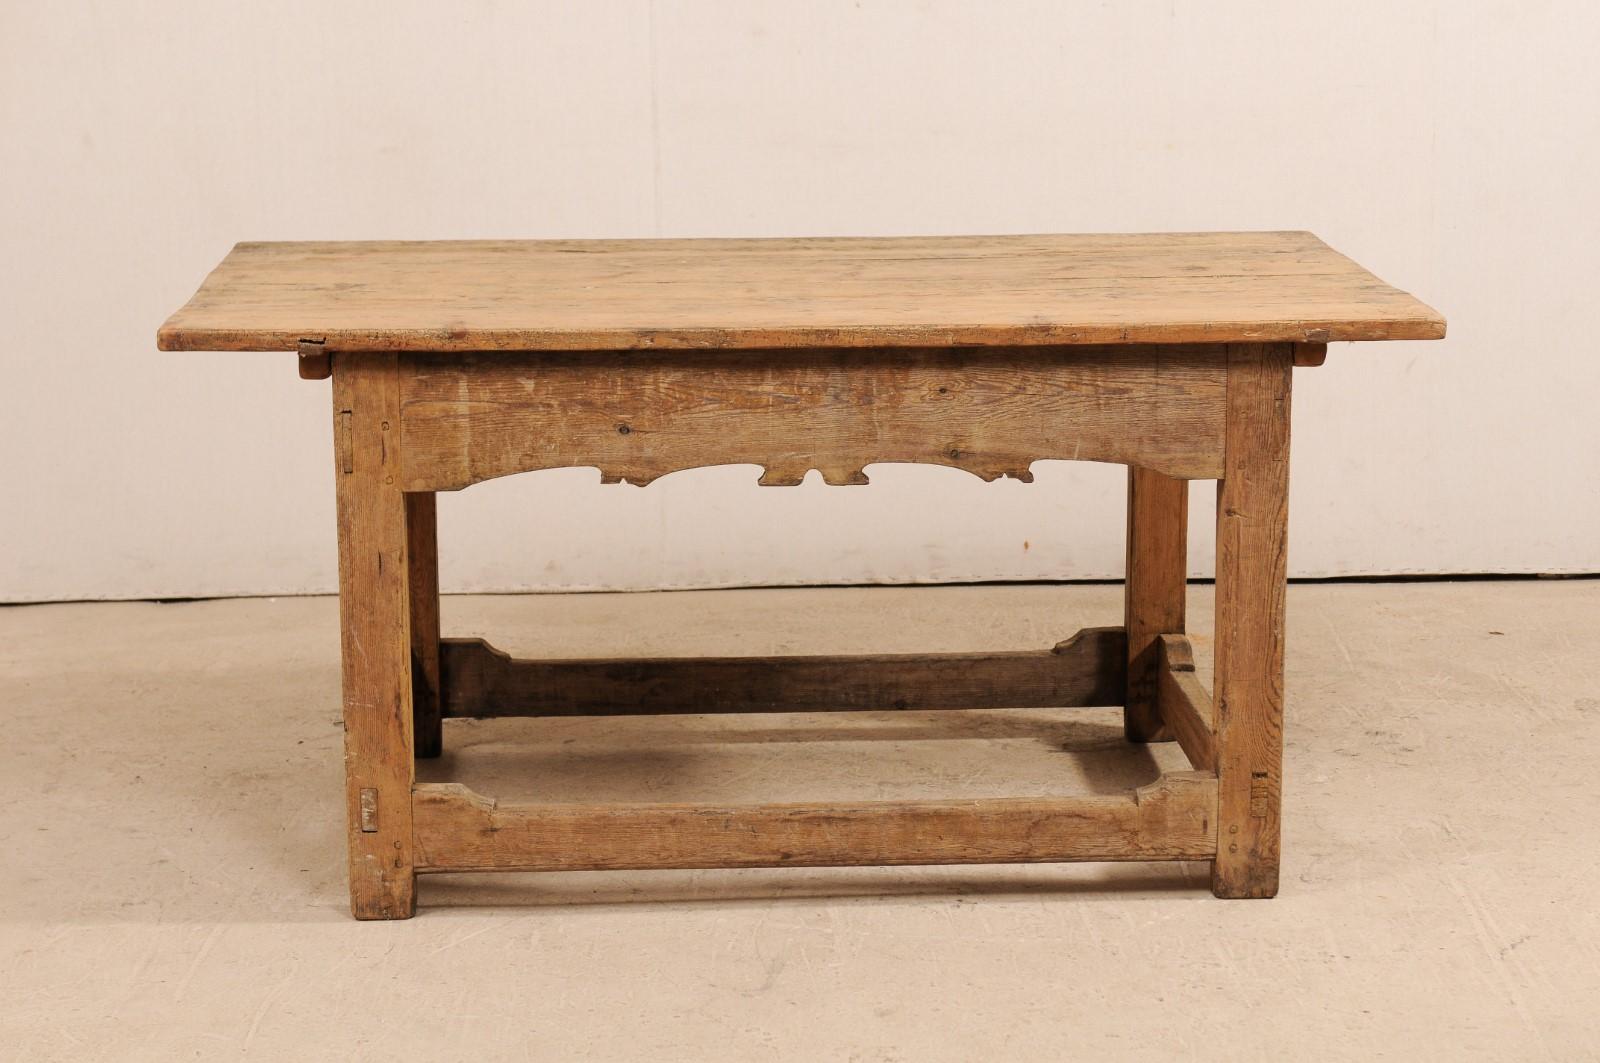 Rustic Early 19th Century Swedish Carved Wood Desk Table with Drawer For Sale